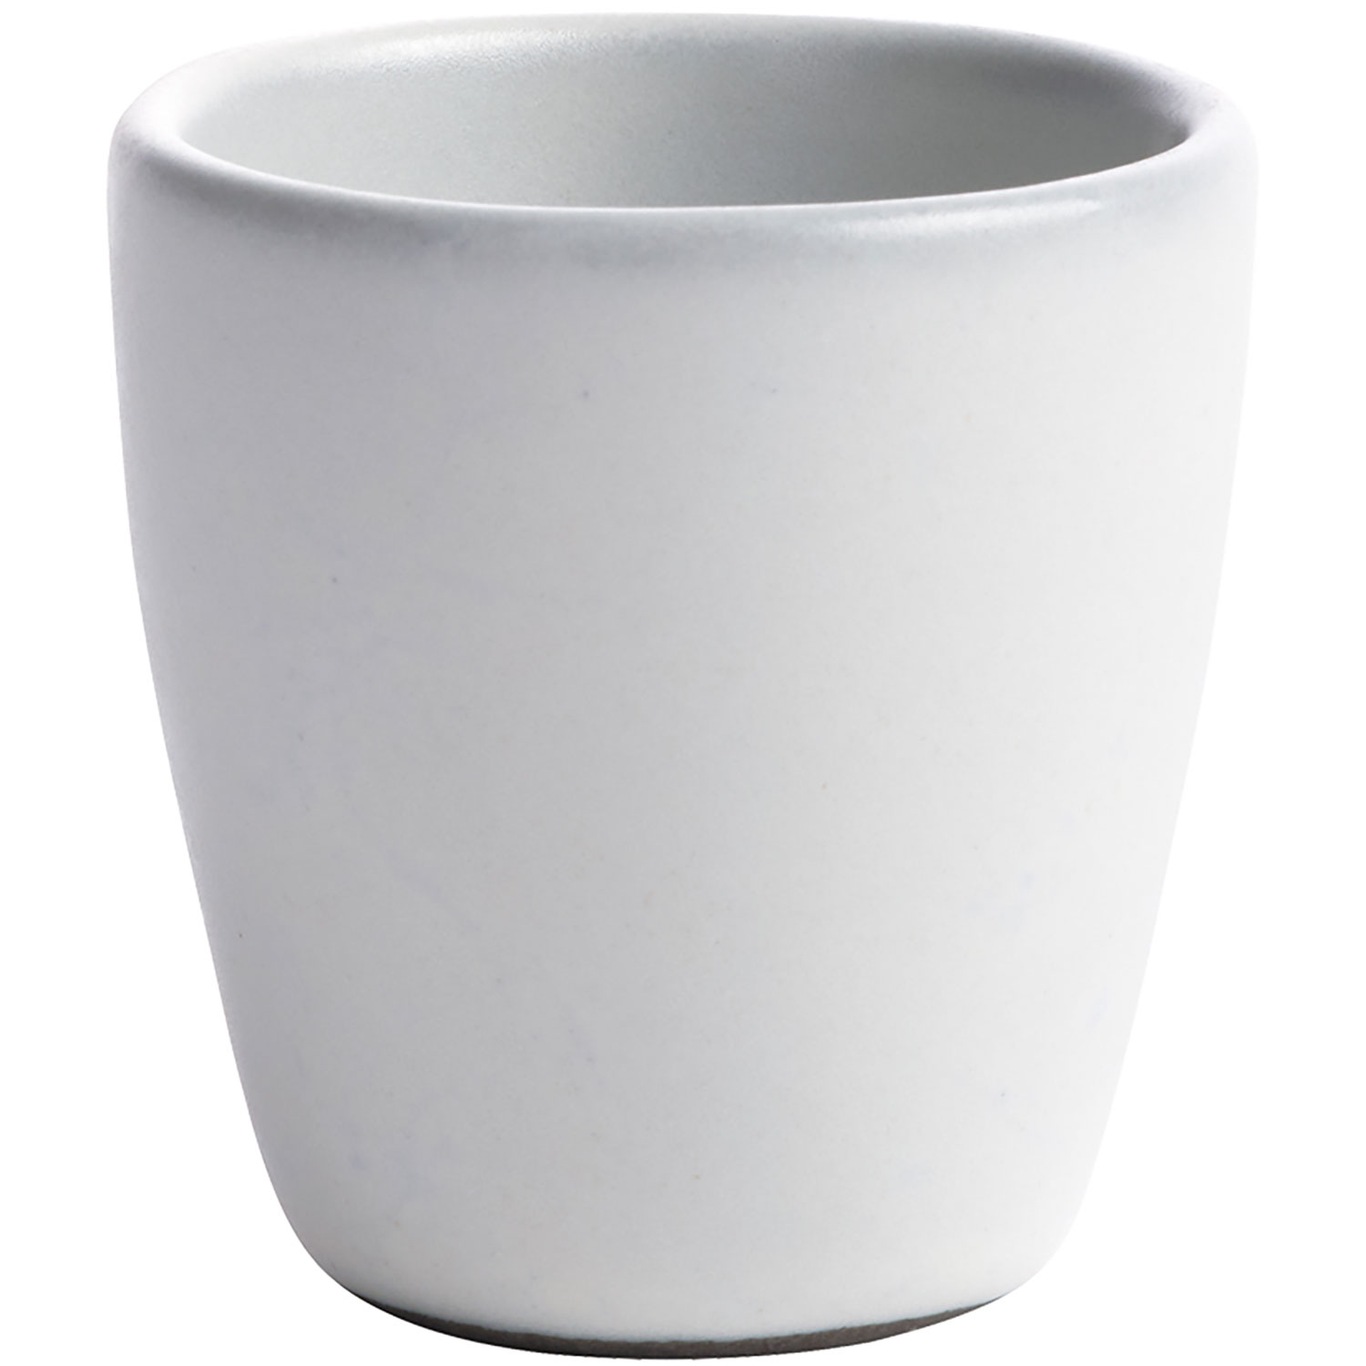 Raw Egg Cup, Artic White